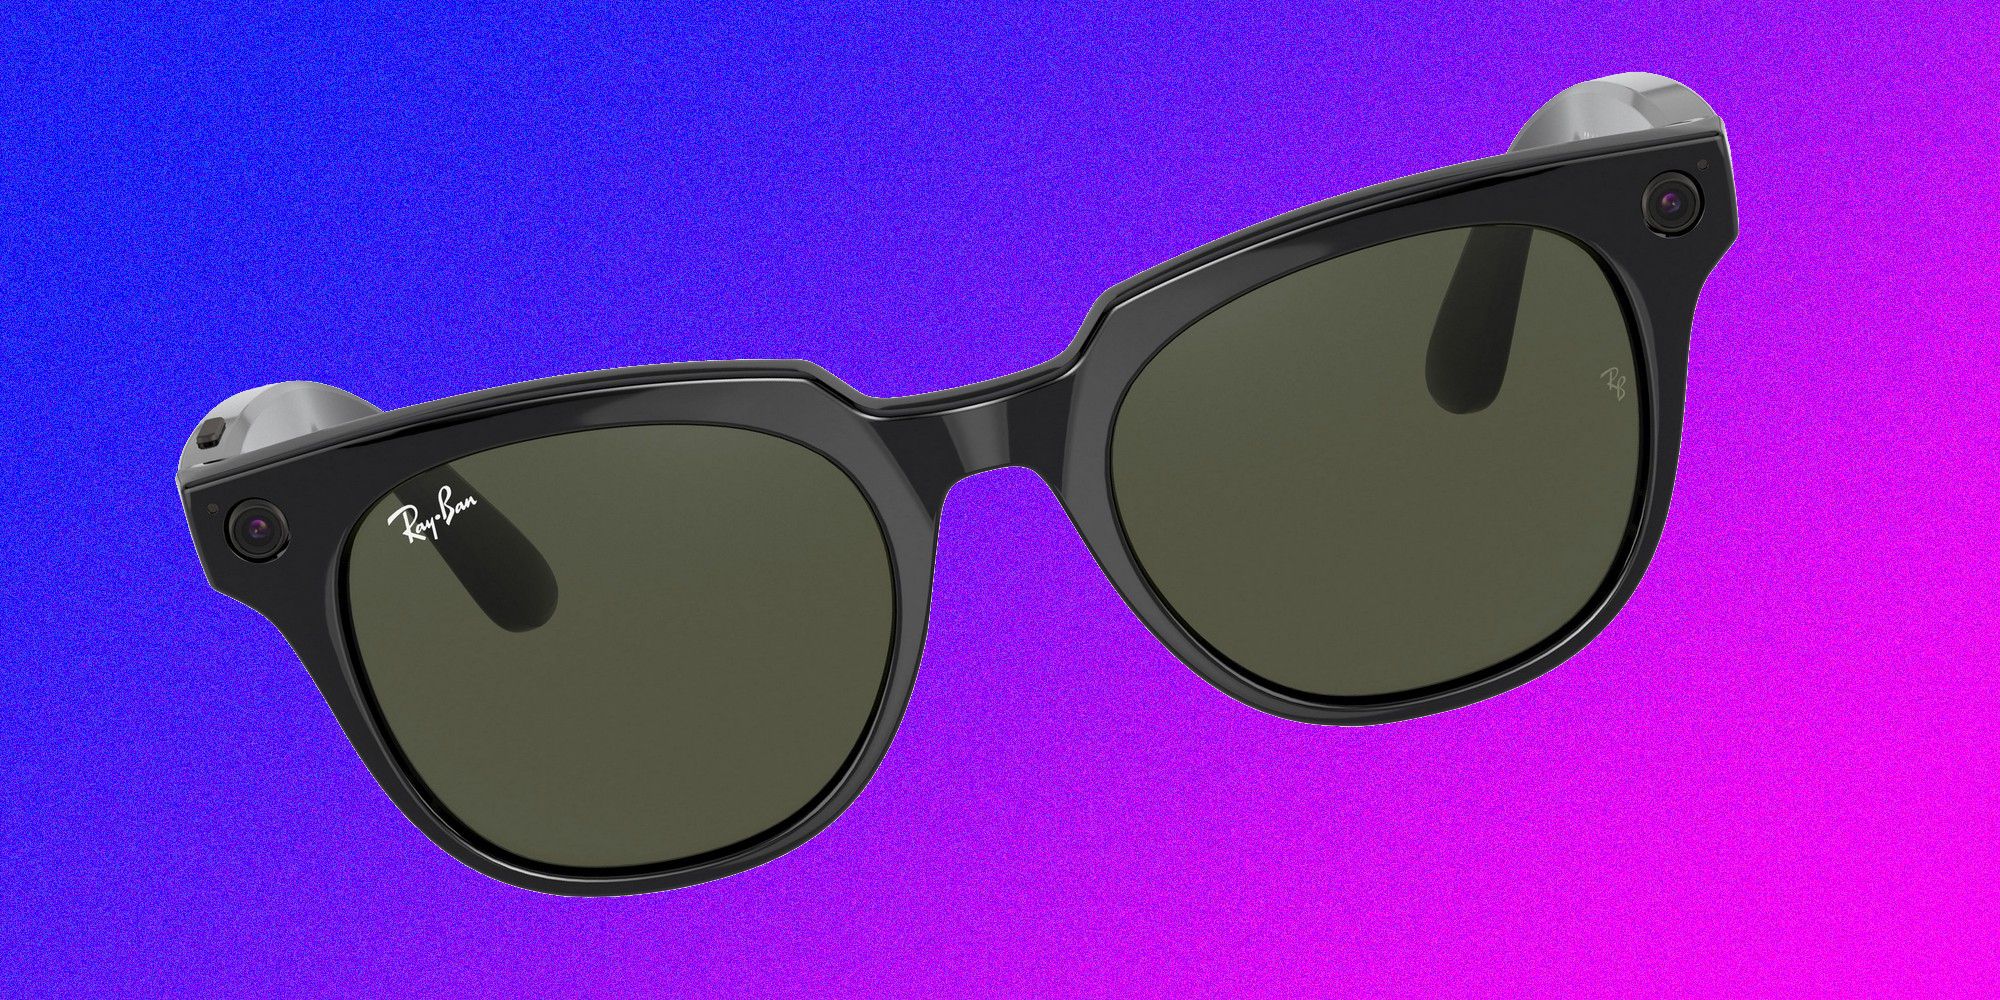 Facebook RayBan Smart Glasses Leaked Hours Ahead of Launch